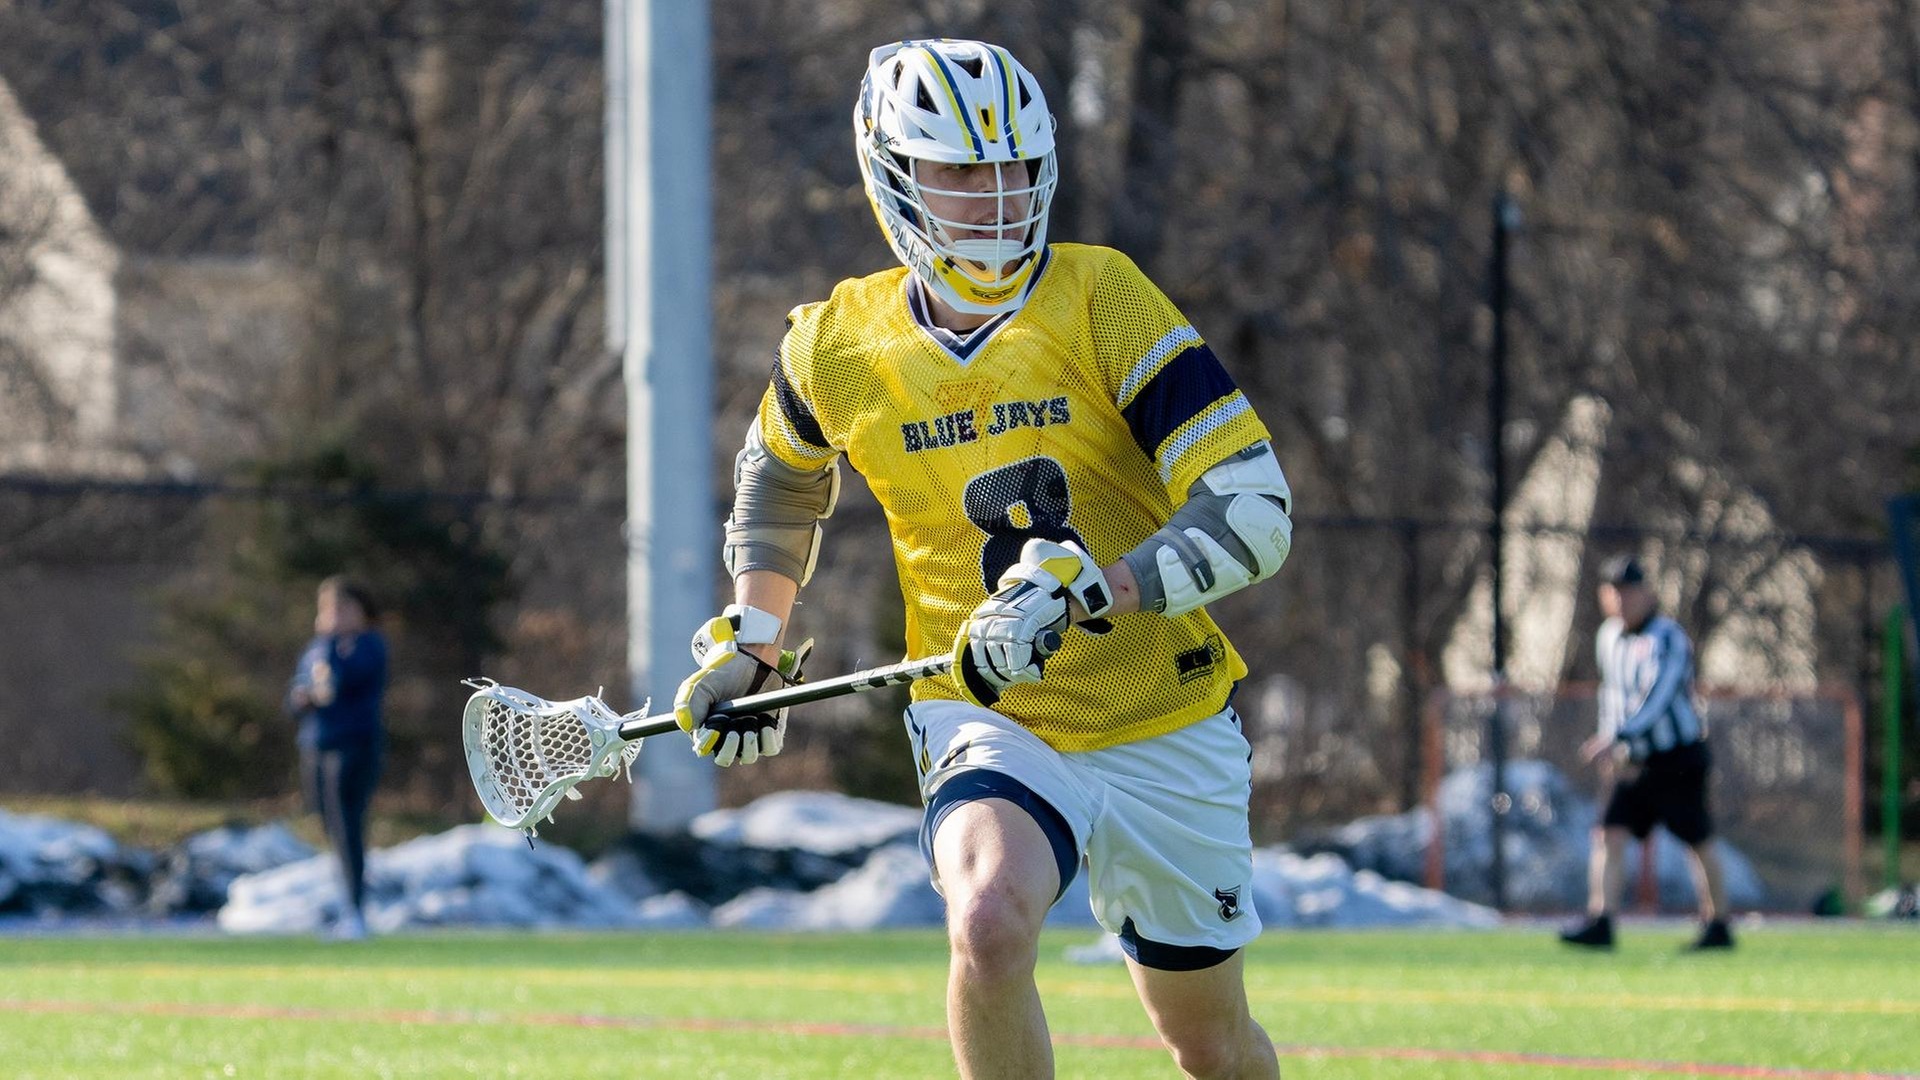 Men's Lacrosse Annihilates Anna Maria, 18-4, at Home in GNAC Play Tuesday